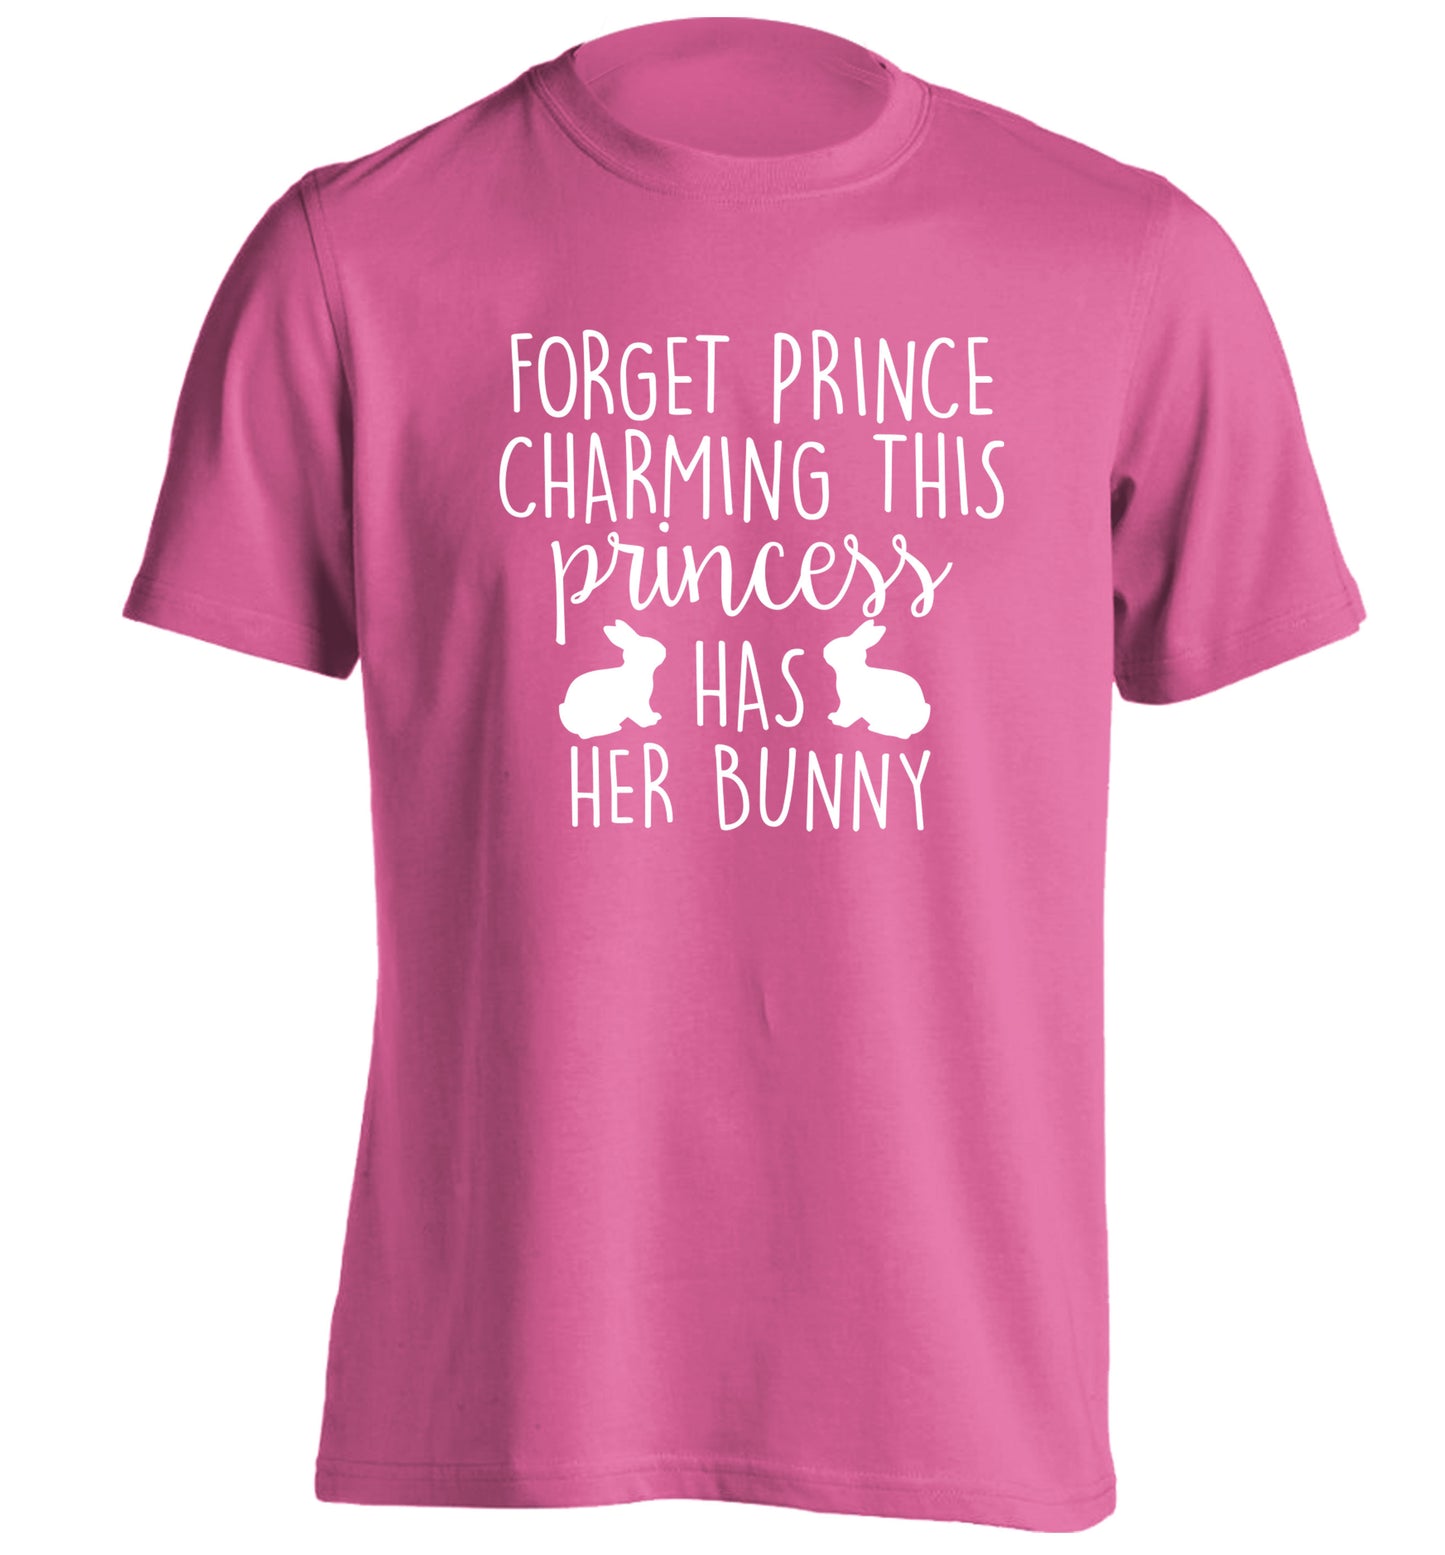 Forget prince charming this princess has her bunny adults unisex pink Tshirt 2XL